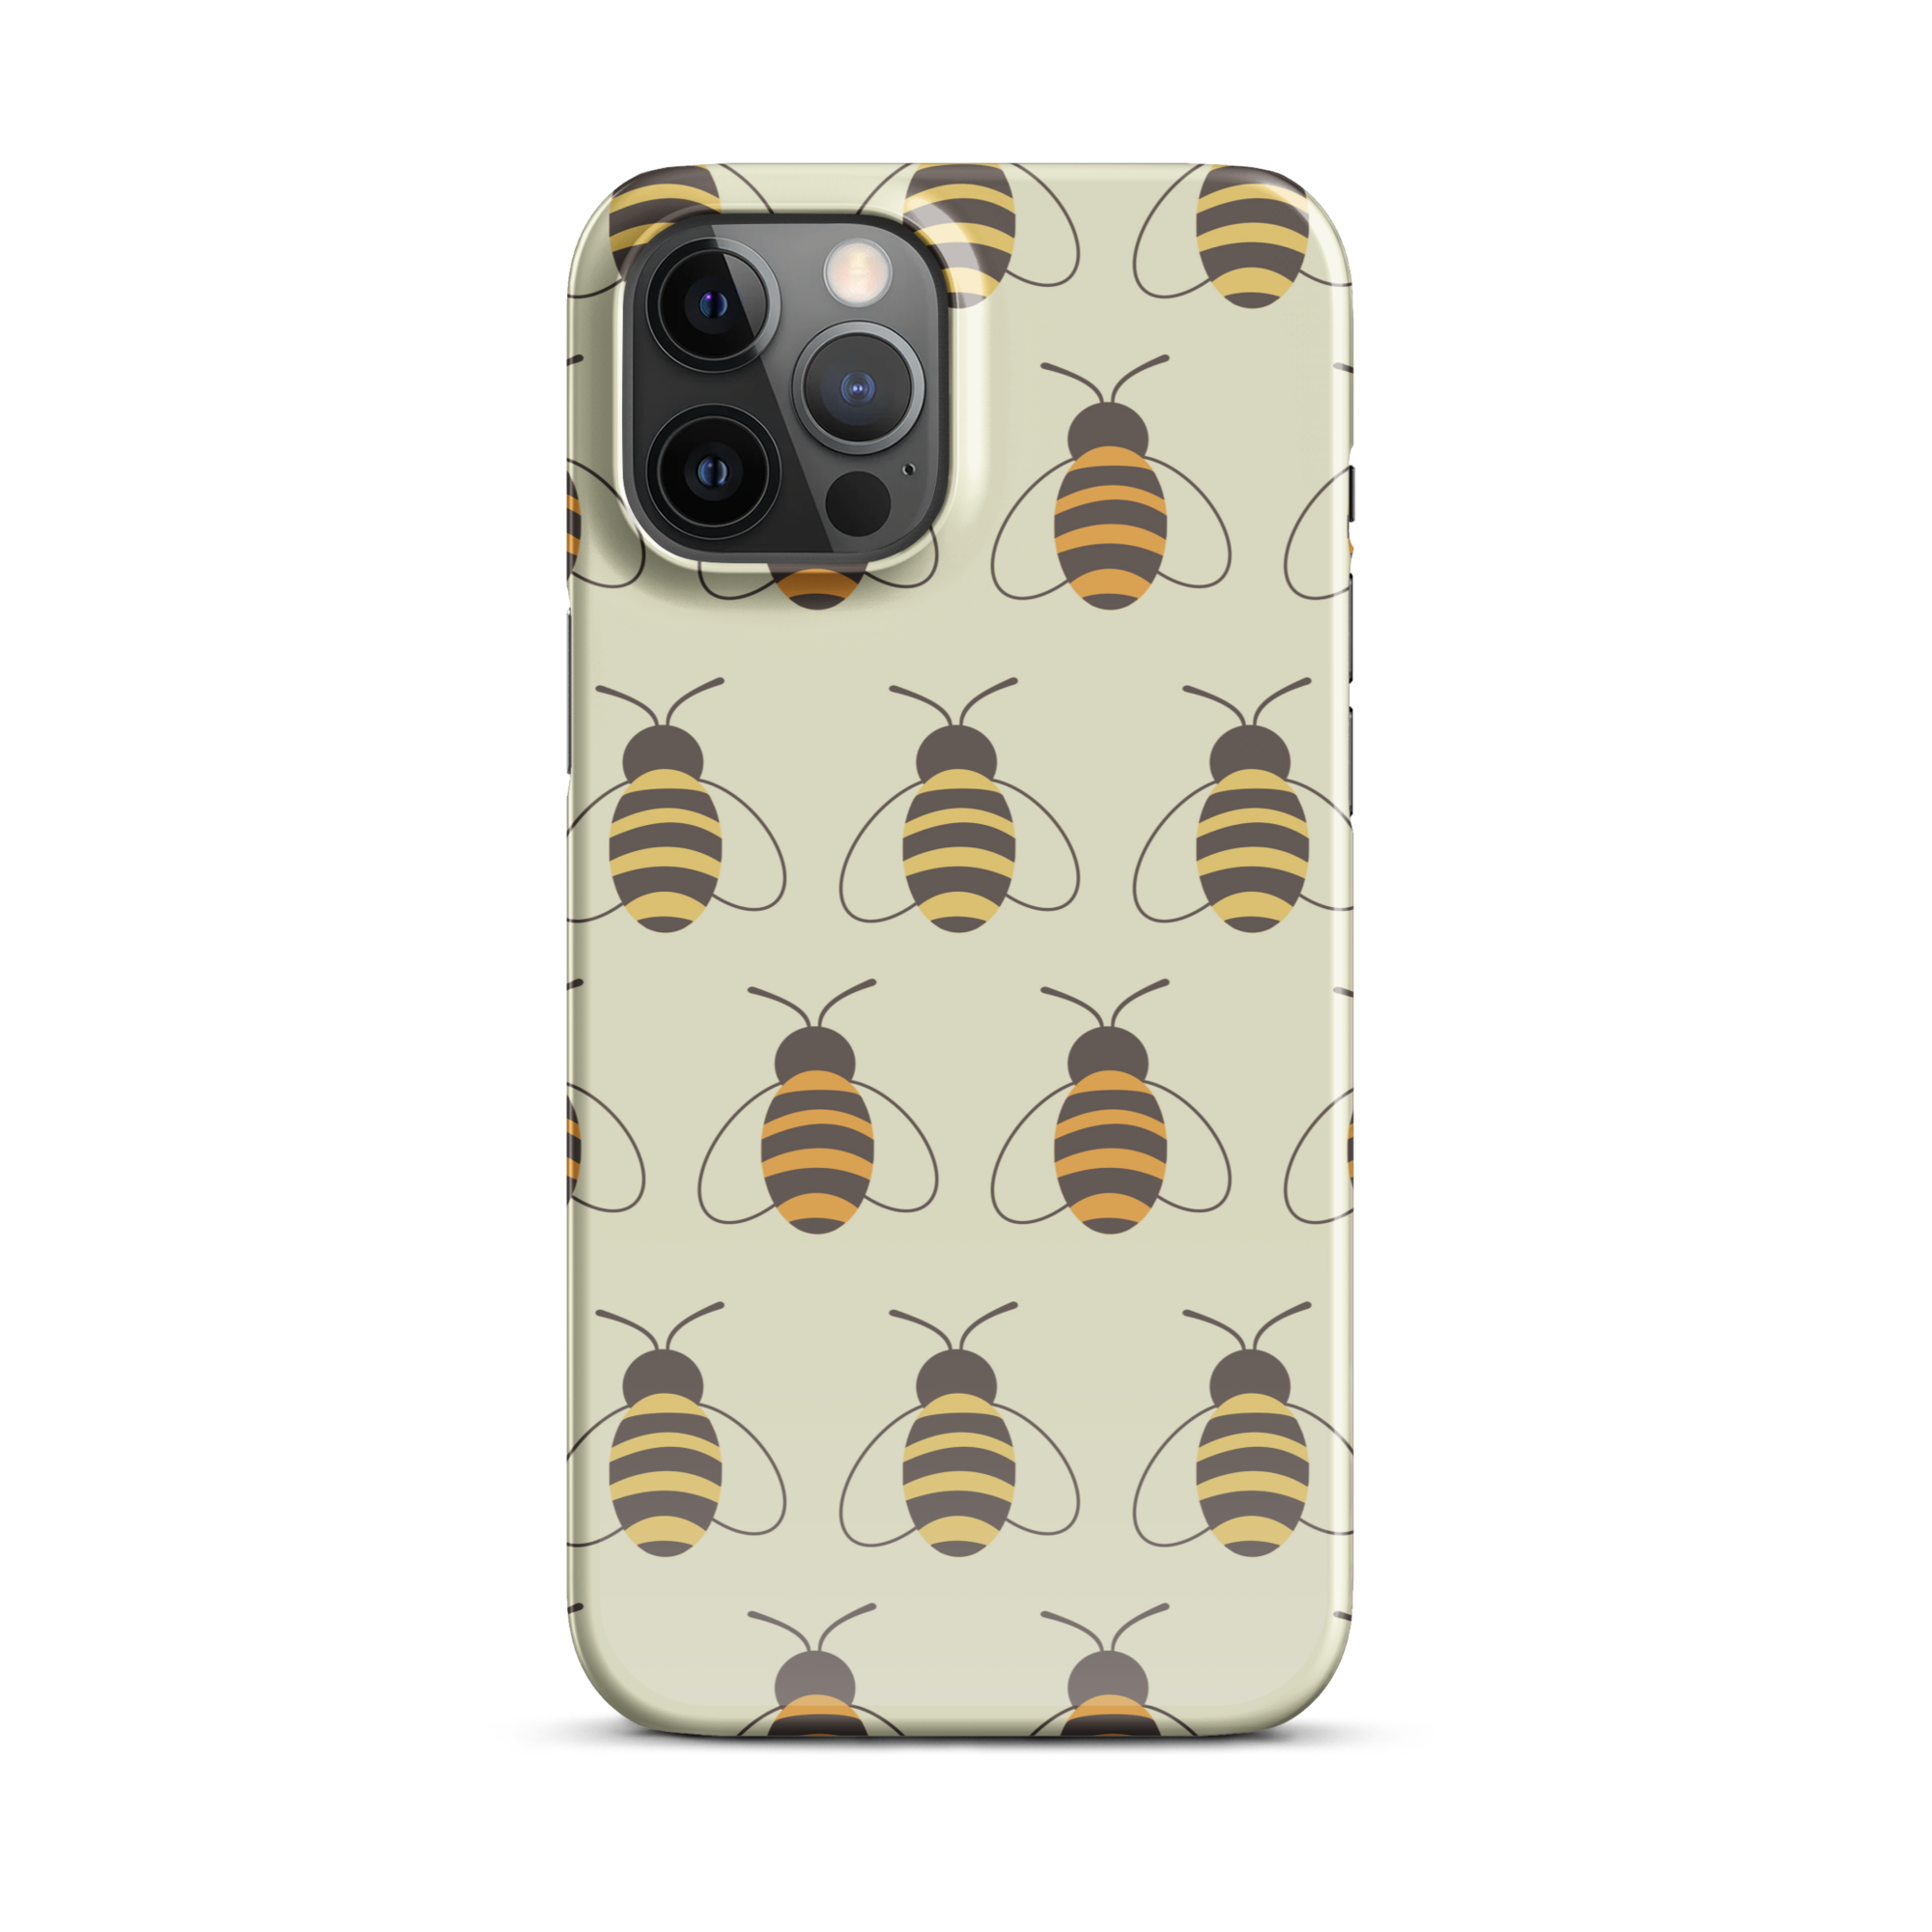 Bees iPhone 12 Pro Max Case